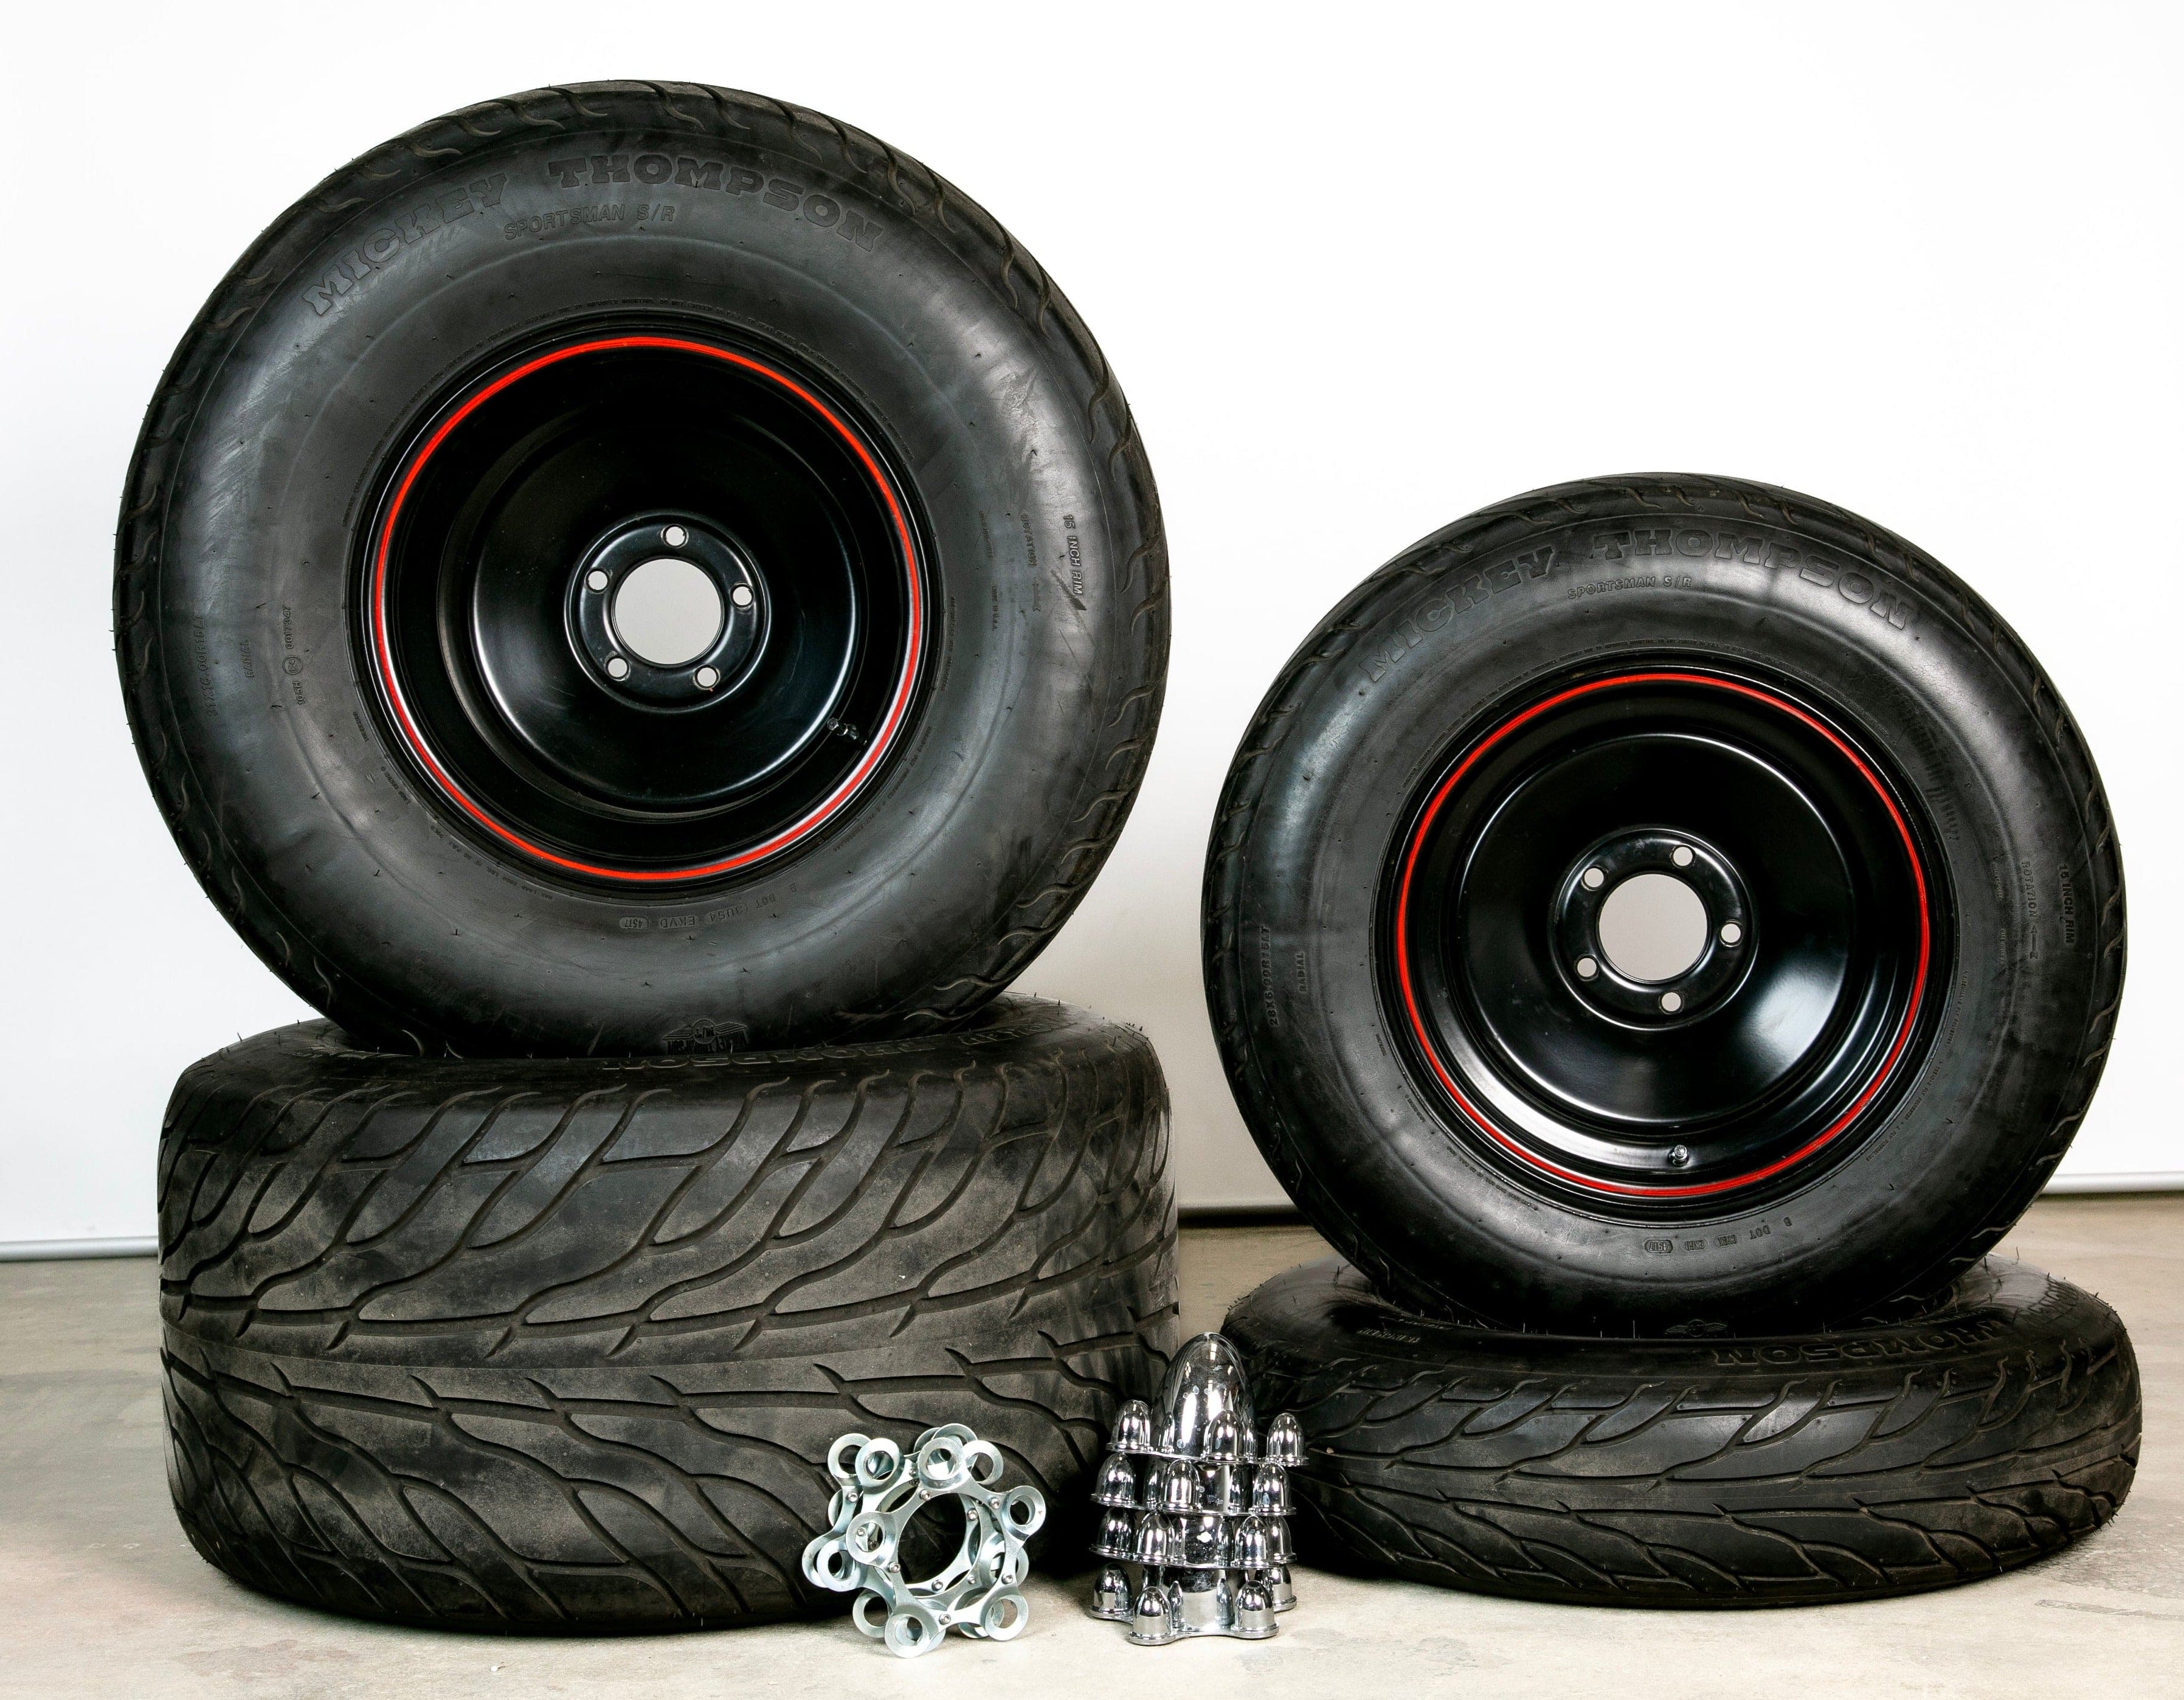 Micky Thompson Sportsman S/R Tires with steel hot rod Wheels (Black) #0425